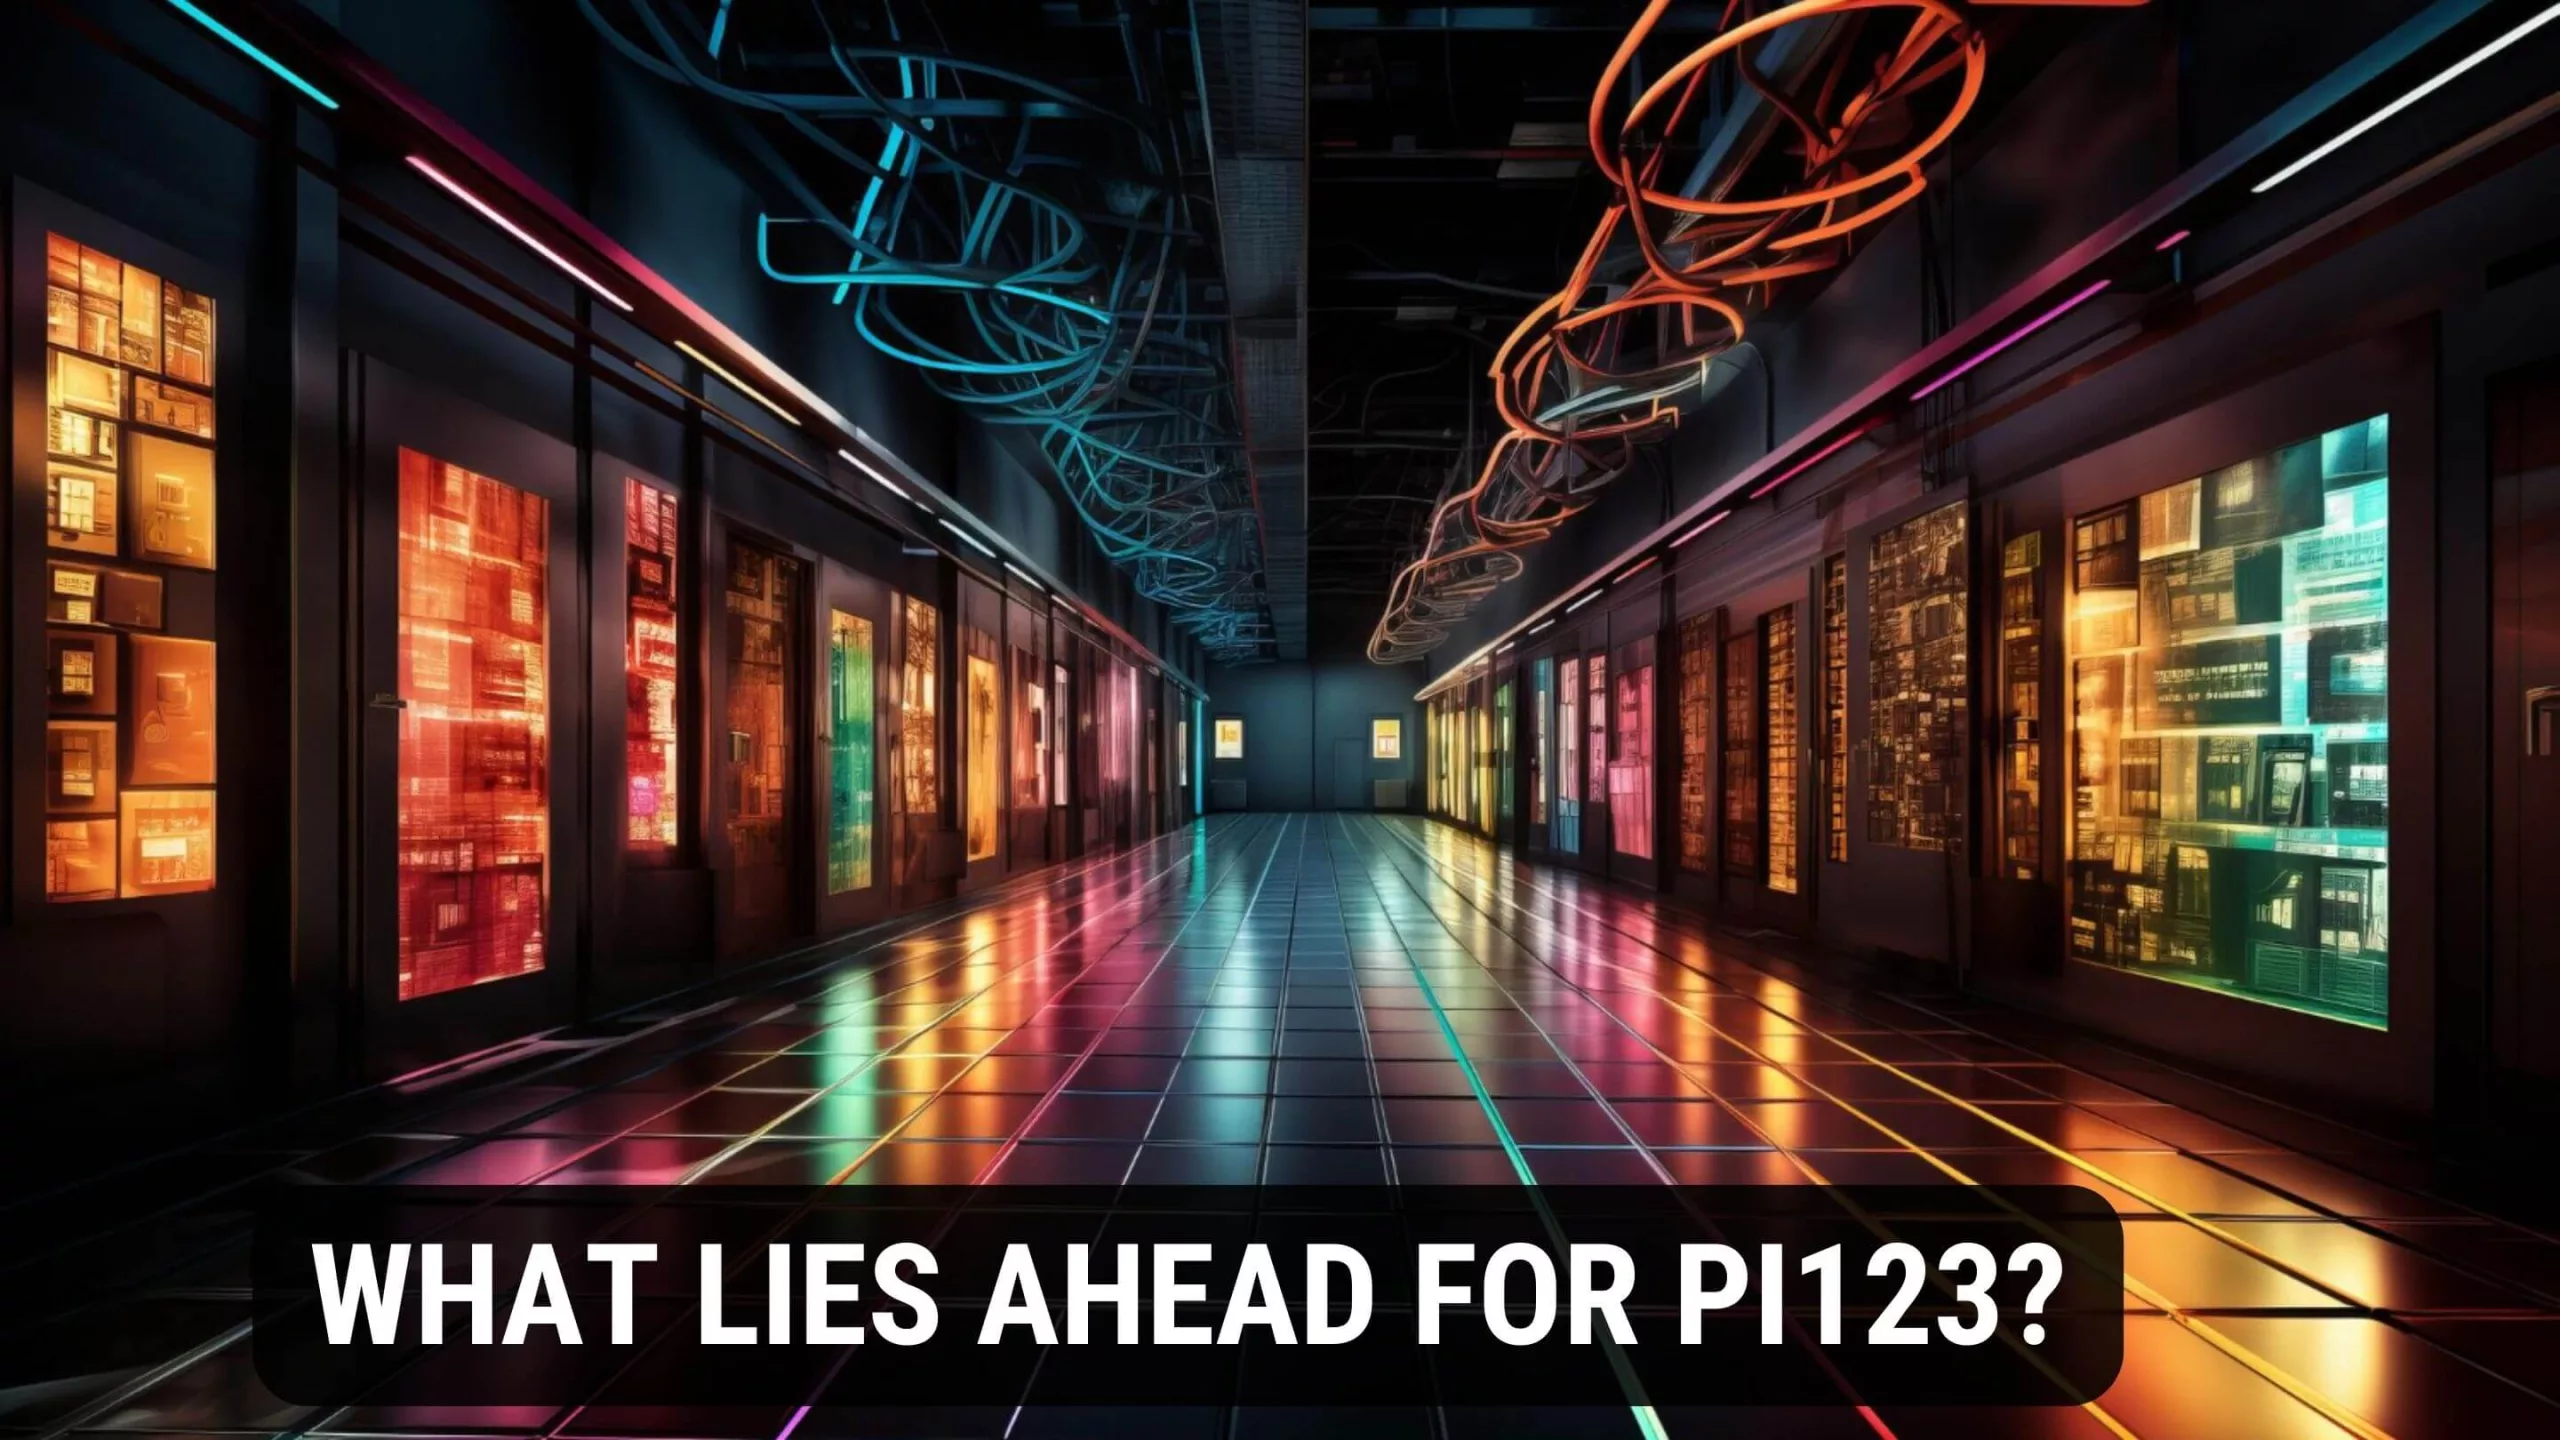 Part 4: What Lies Ahead for Pi123?